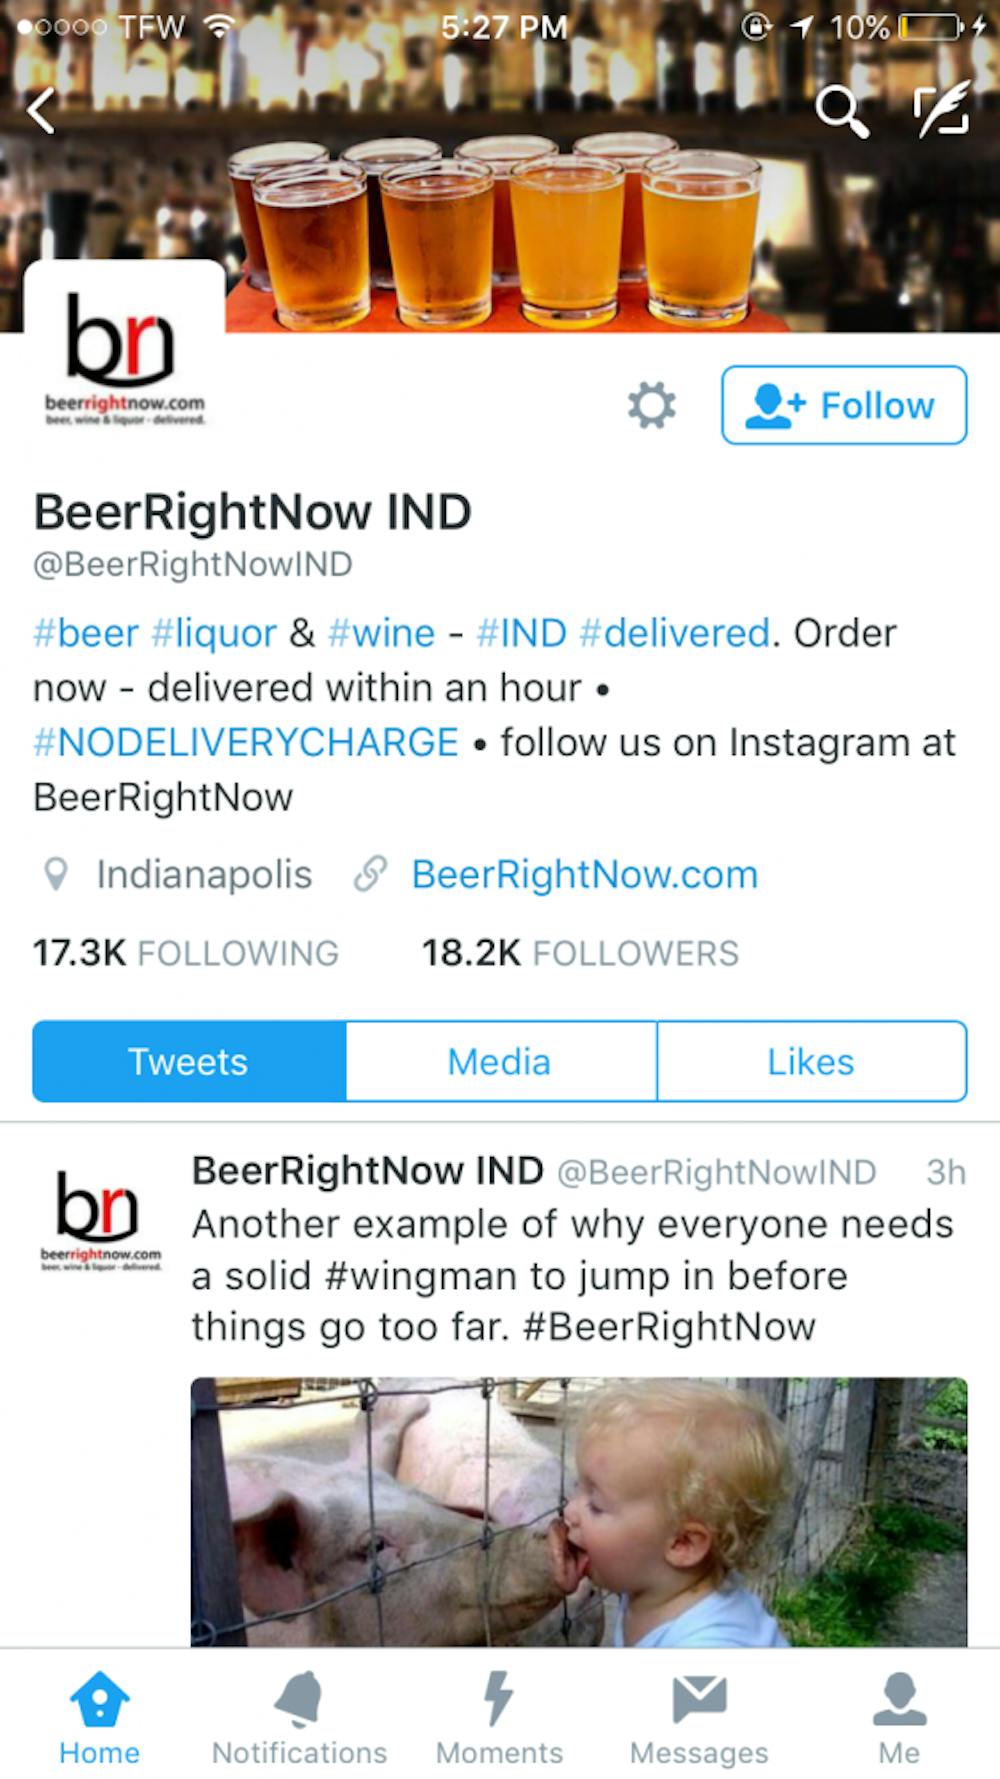 Beer Right Now started in 2008 in Philadelphia and has expanded into bigger cities like New York City and Los Angeles. The company is an online delivery service that brings alcohol to customers' doors. PHOTO COURTESY OF BEER RIGHT NOW TWITTER